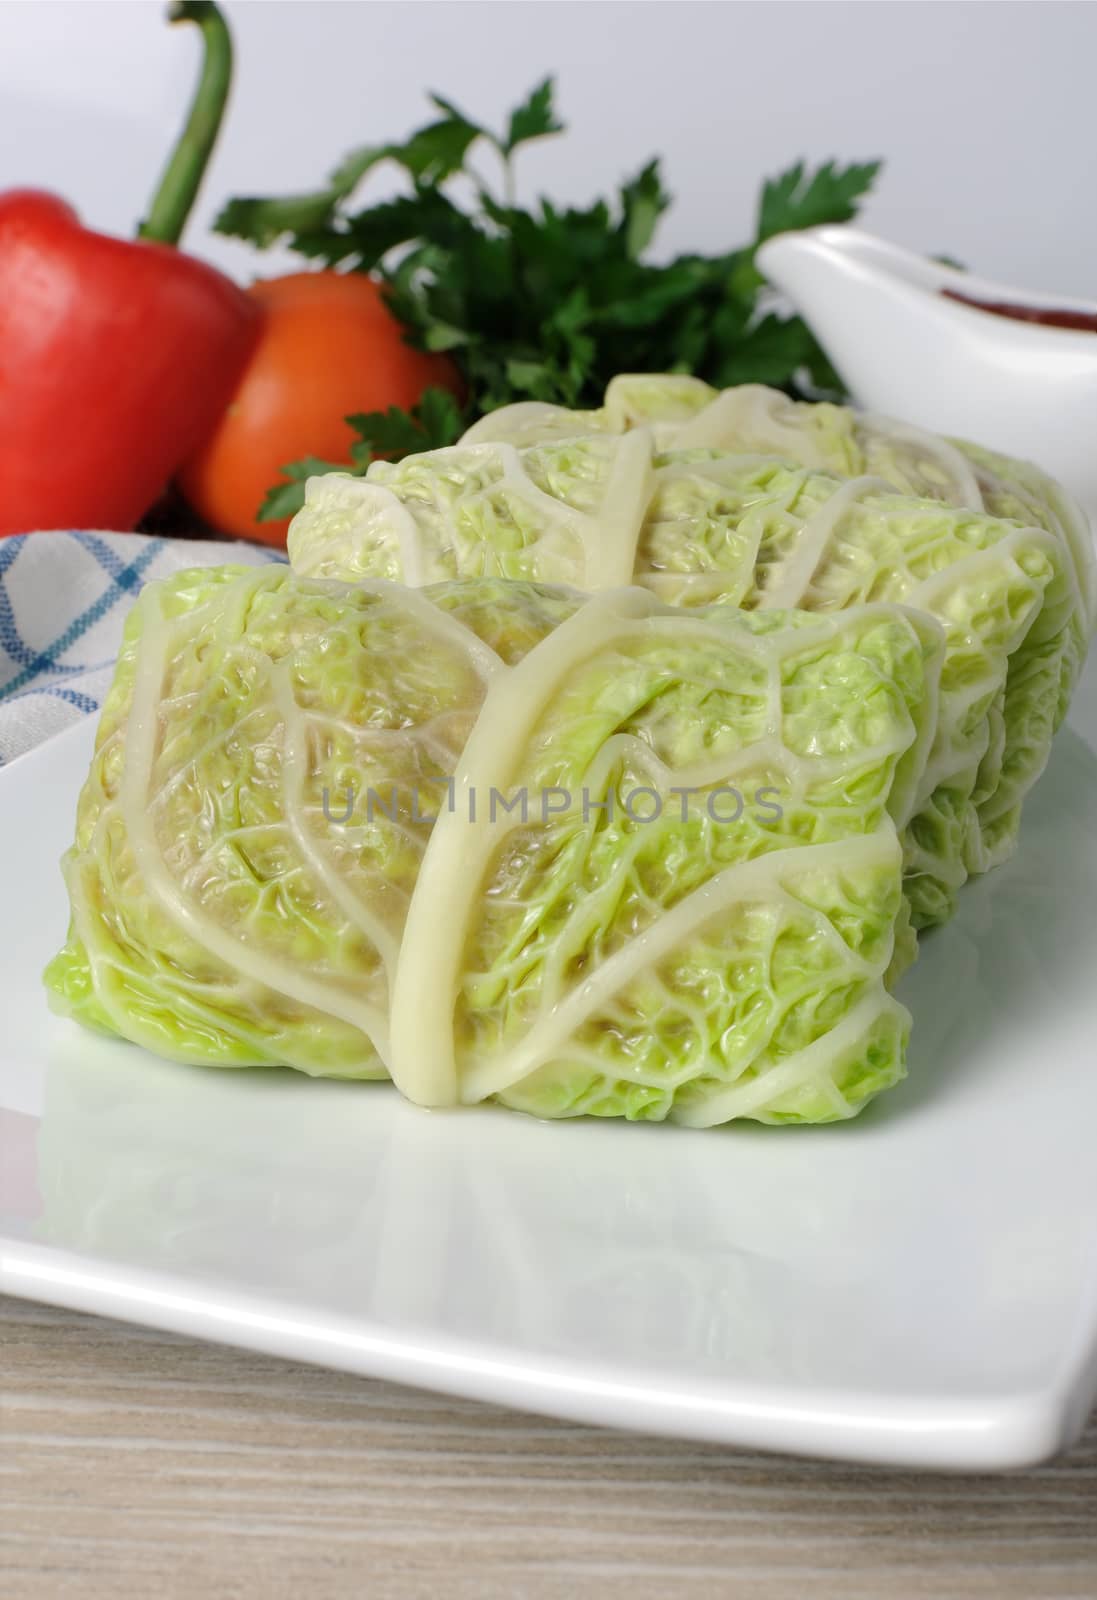 stuffed savoy cabbage on a plate